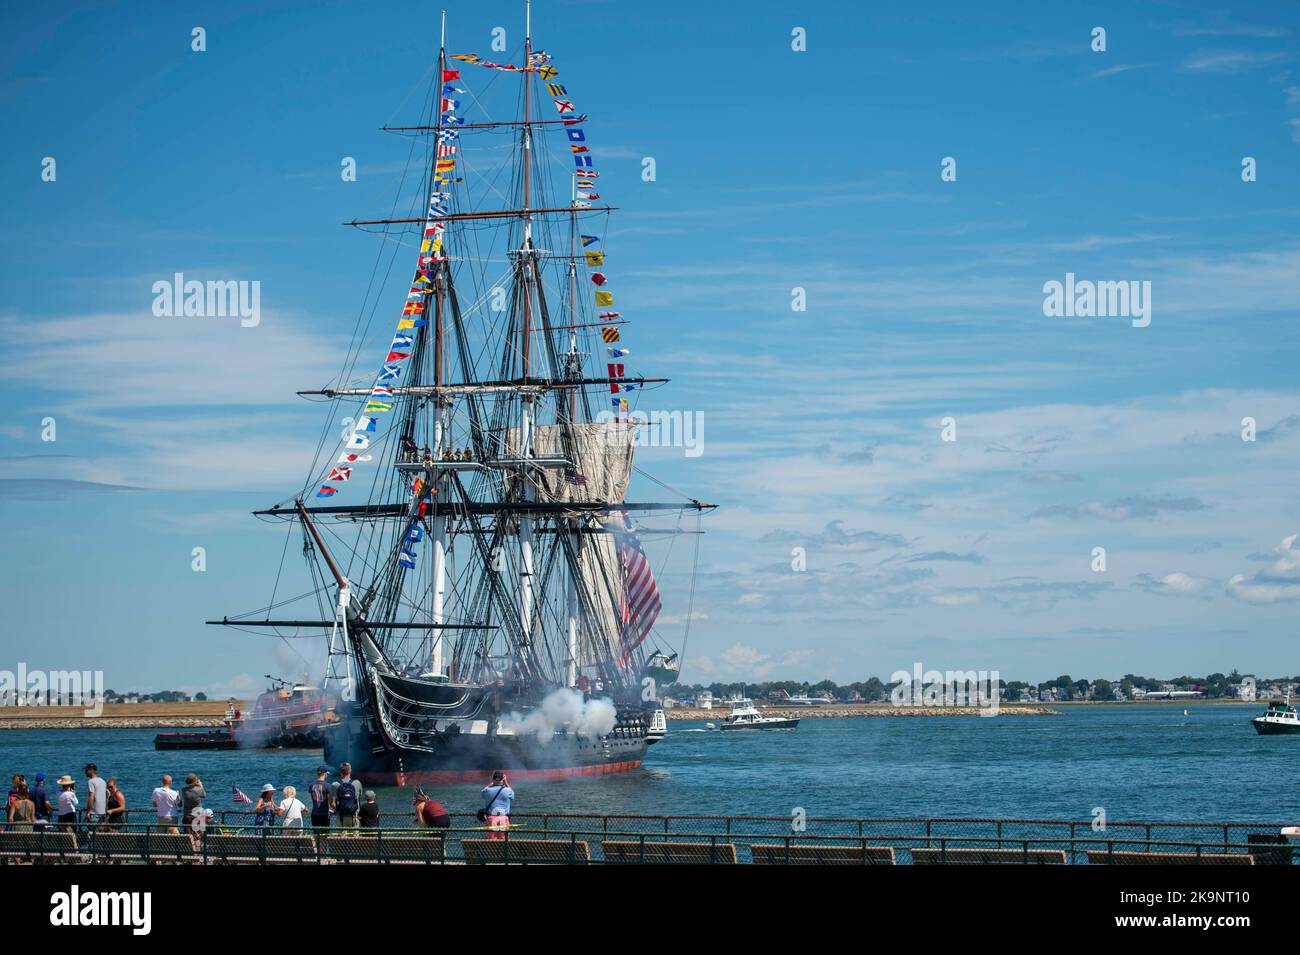 USS Constitution fires a 21-gun salute USS Constitution is the world’s oldest commissioned warship afloat and played a crucial role in the Barbary Wars and the War of 1812, actively defending sea lanes from 1797 to 1855. Stock Photo